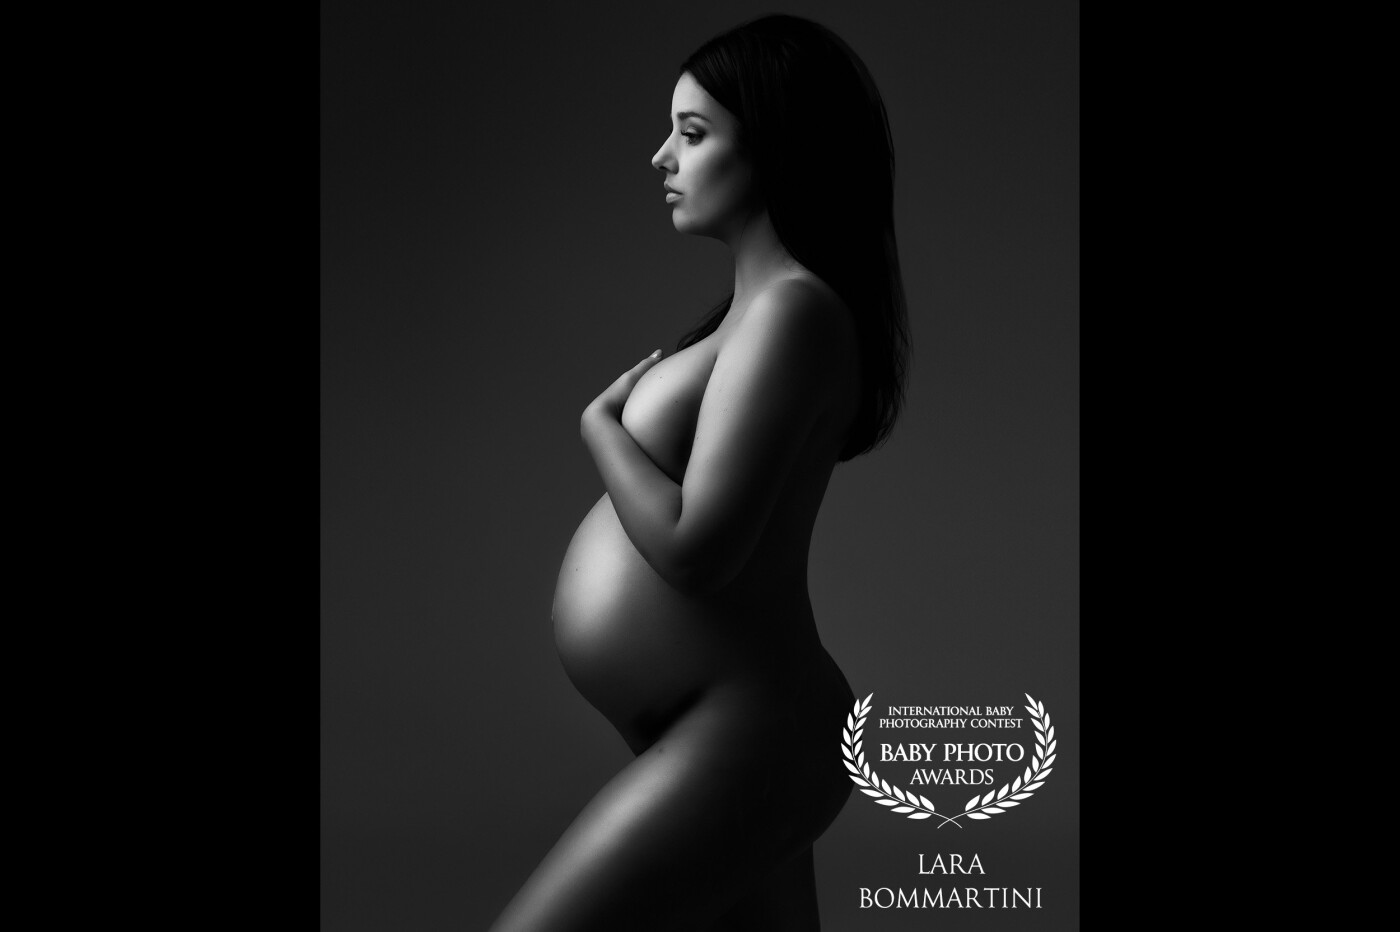 This woman drove more than 300 kilometers to my studio on her own. That says a lot about her personality. I wanted to capture this strong personality, combined with her beautiful feminine forms from her pregnancy. I am very happy with this photo. The strength of this photo is the tranquility, confidence, and simplicity, combined with beautiful lines.